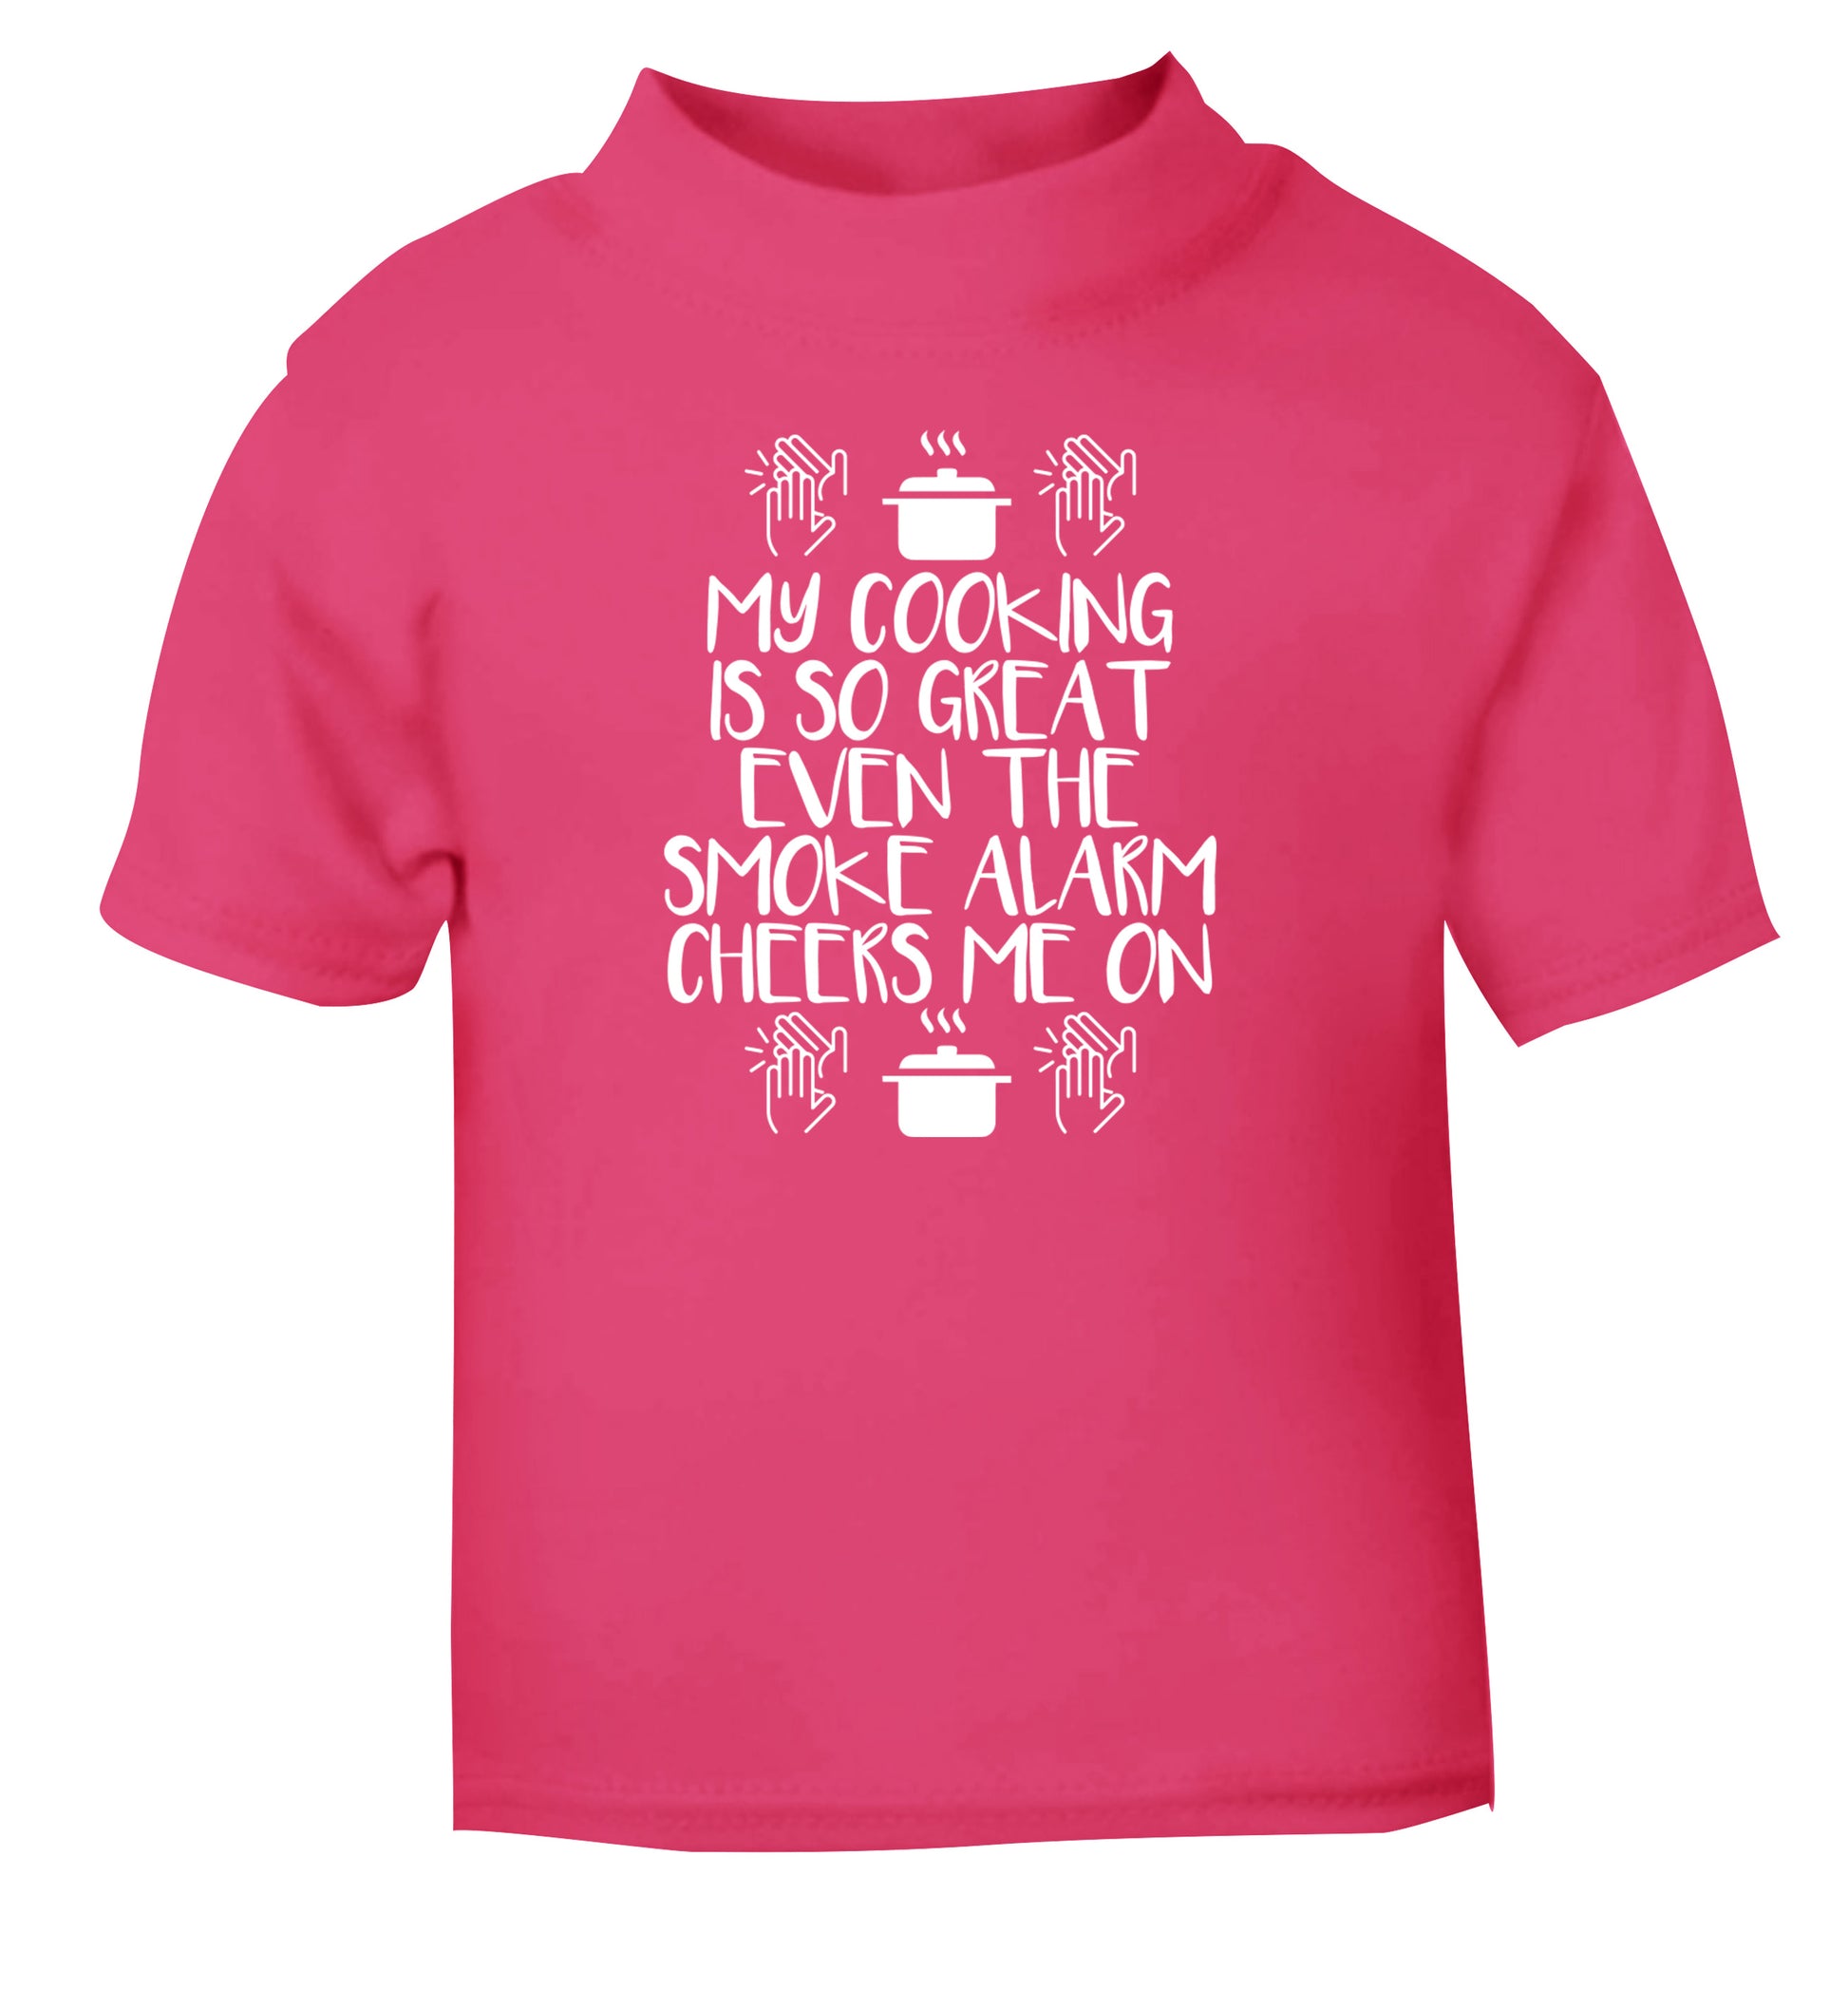 My cooking is so great even the smoke alarm cheers me on! pink Baby Toddler Tshirt 2 Years